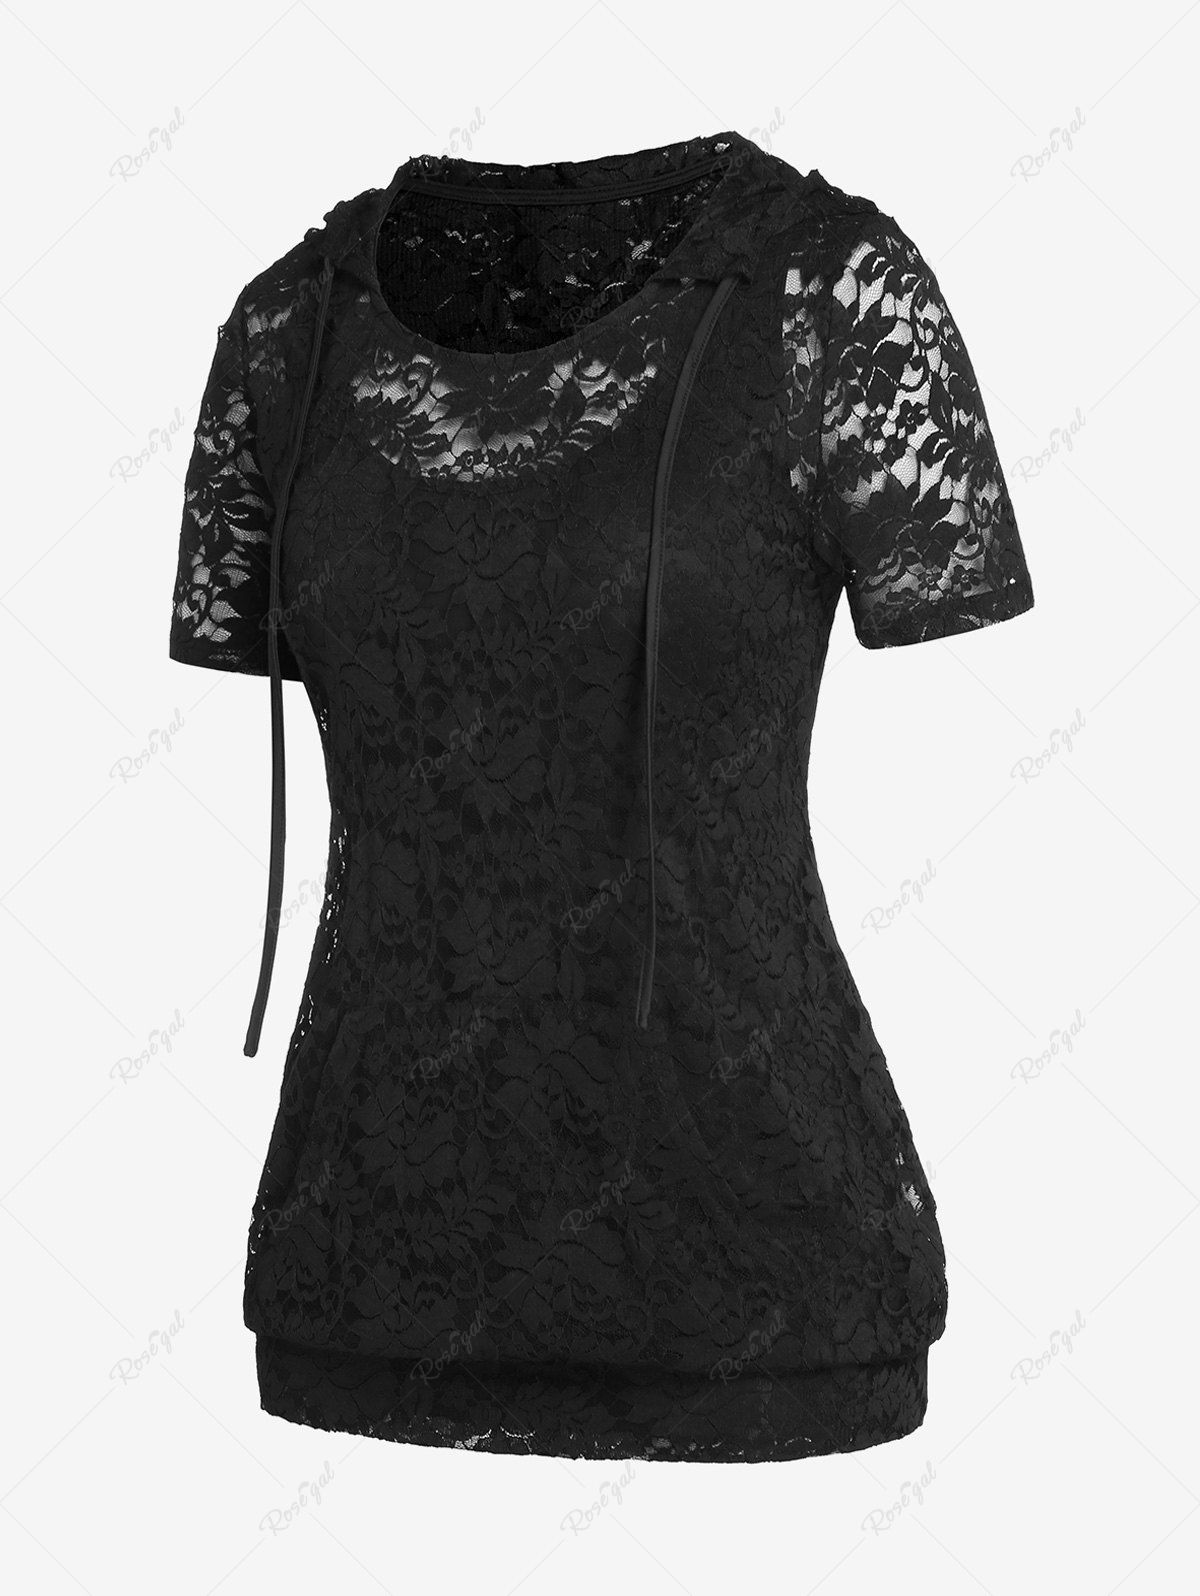 Discount Plus Size & Curve Hooded Sheer Lace T Shirt and Tank Top Set  